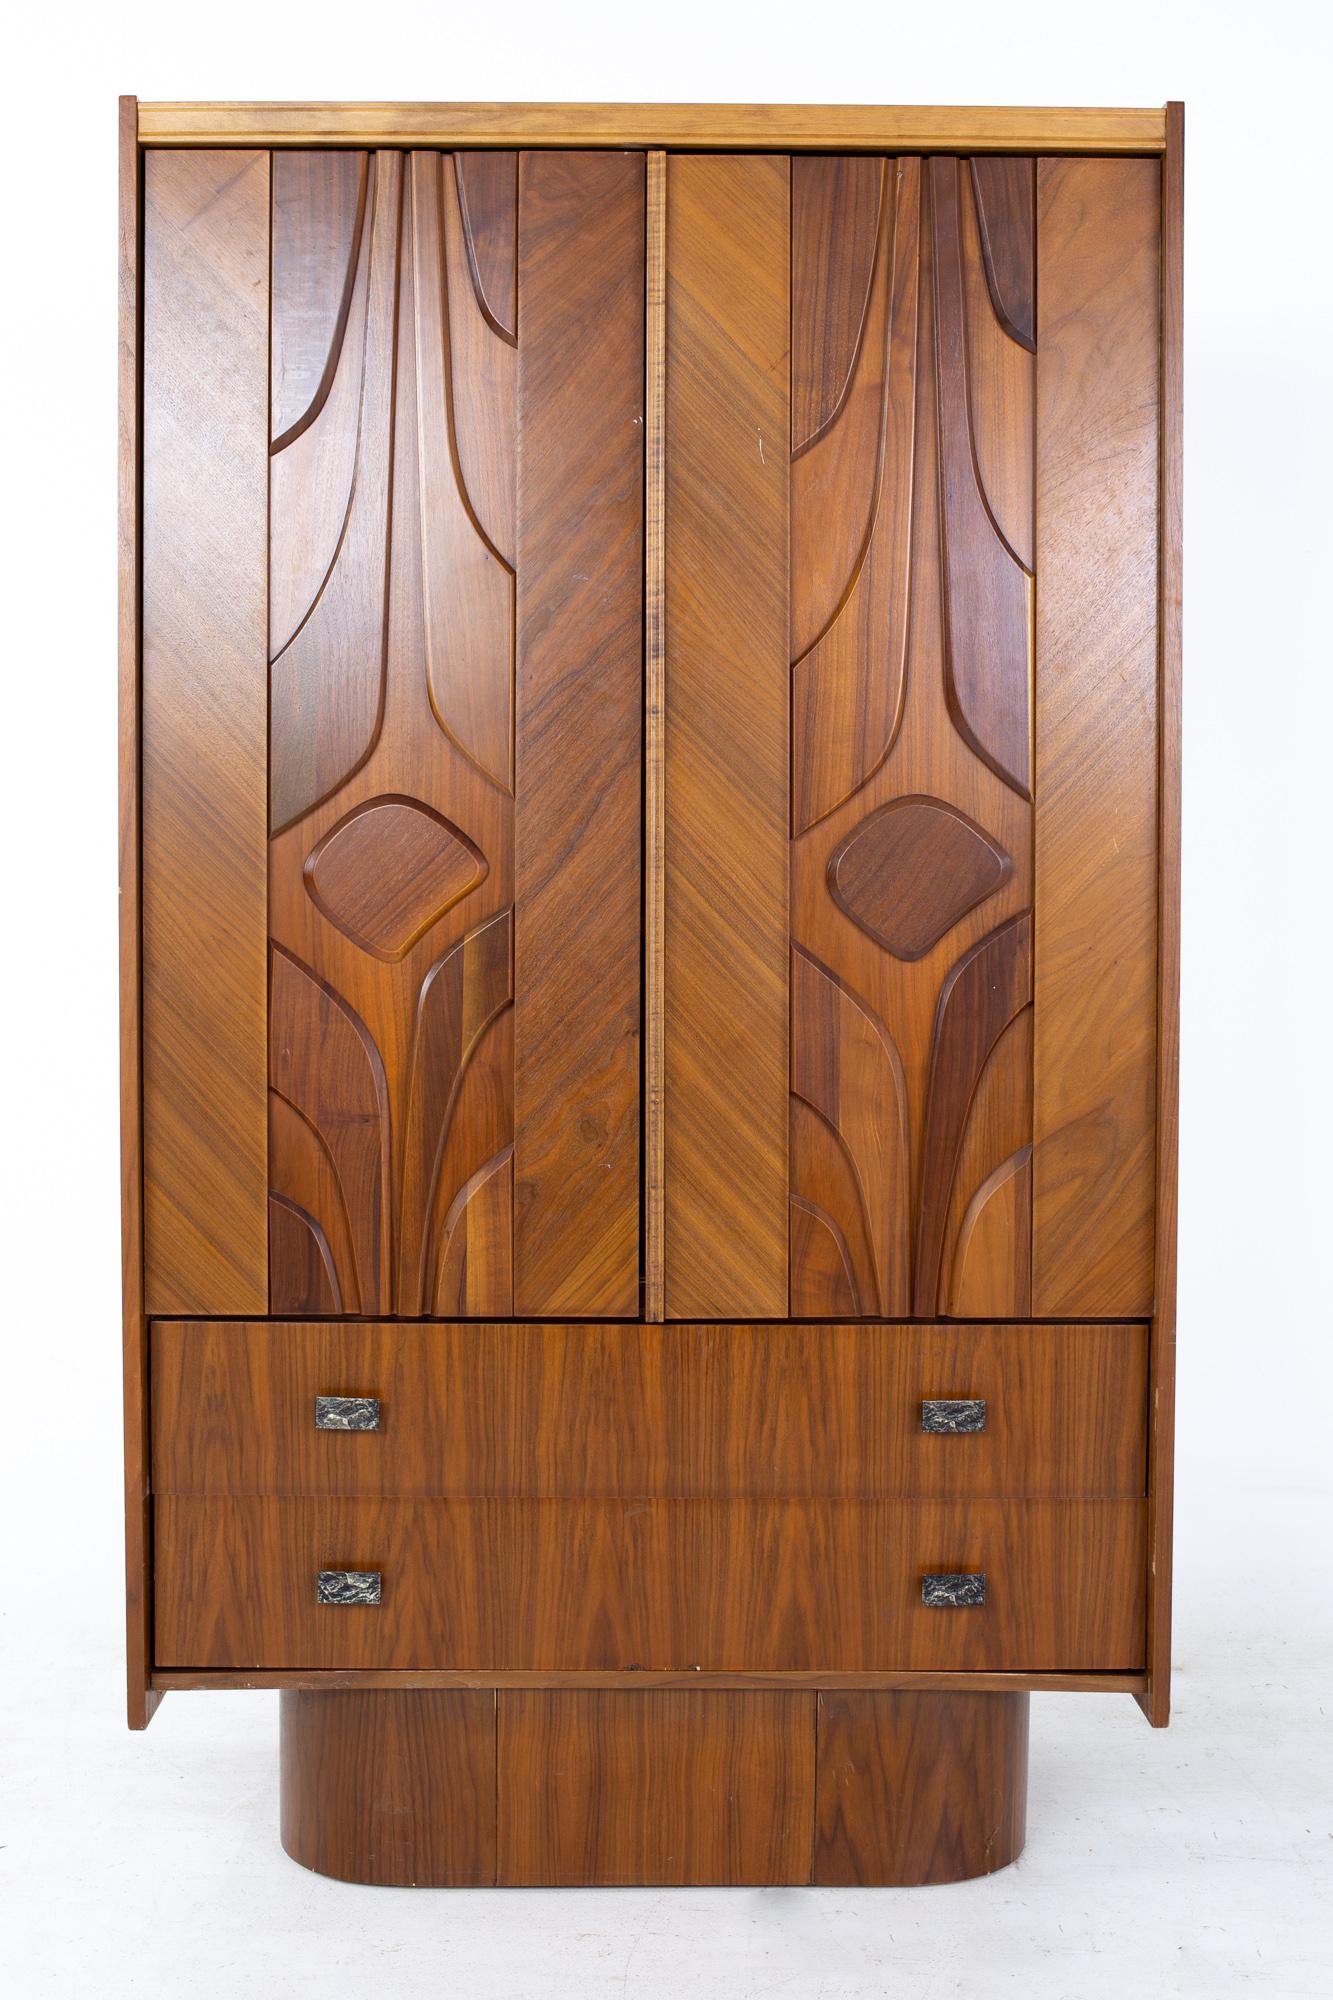 Mid-Century Canadian Brutalist walnut armoire highboy dresser.

Dresser measures: 39 wide x 20 deep x 66.5 inches high.

All pieces of furniture can be had in what we call restored vintage condition. That means the piece is restored upon